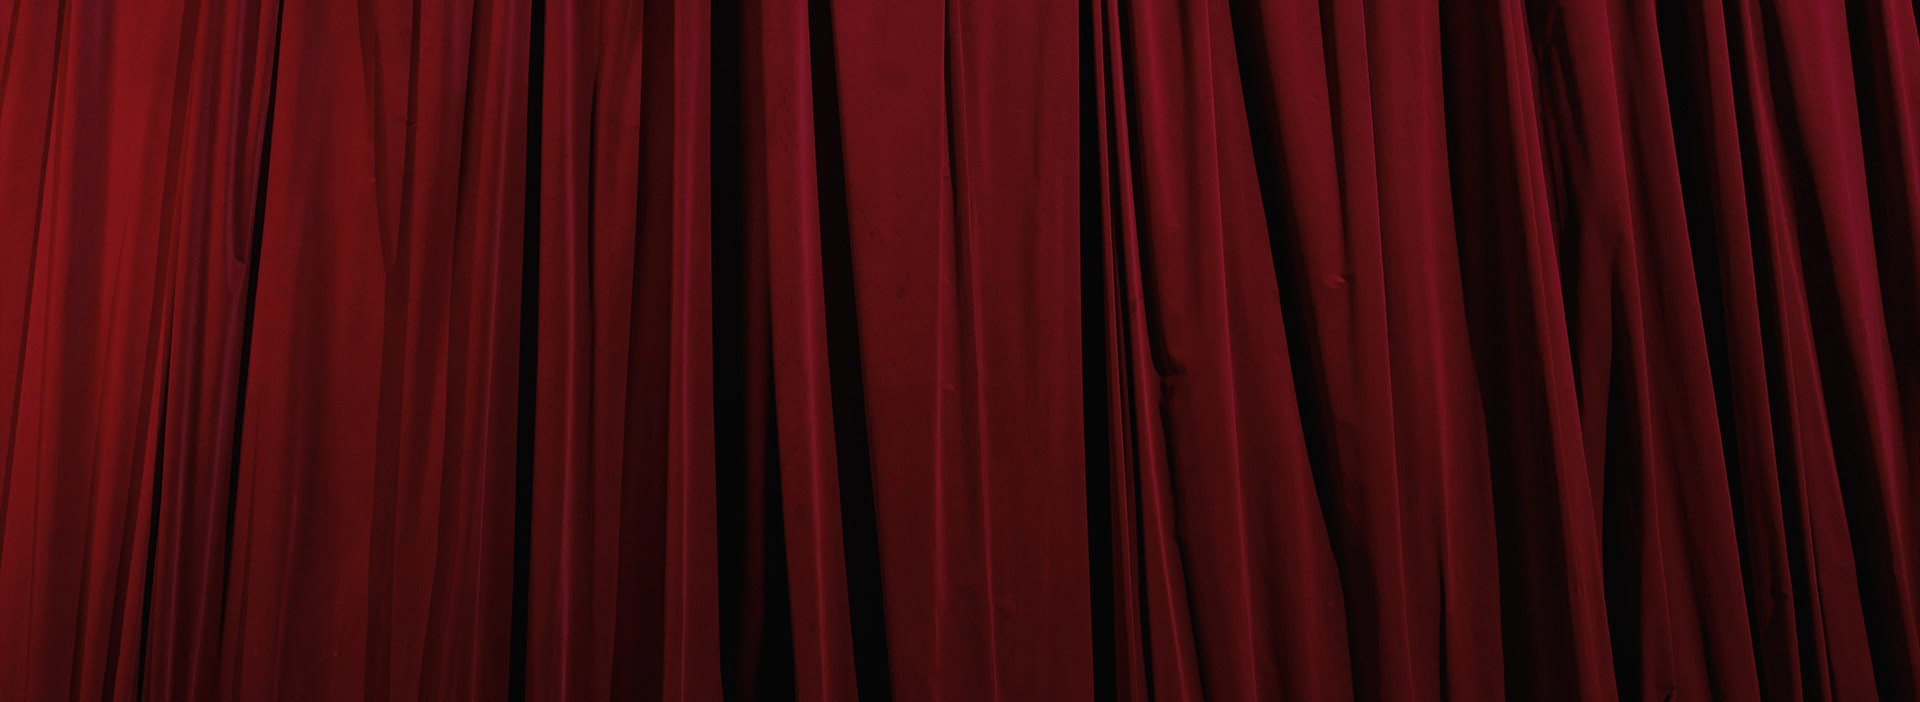 Photo of theater curtains